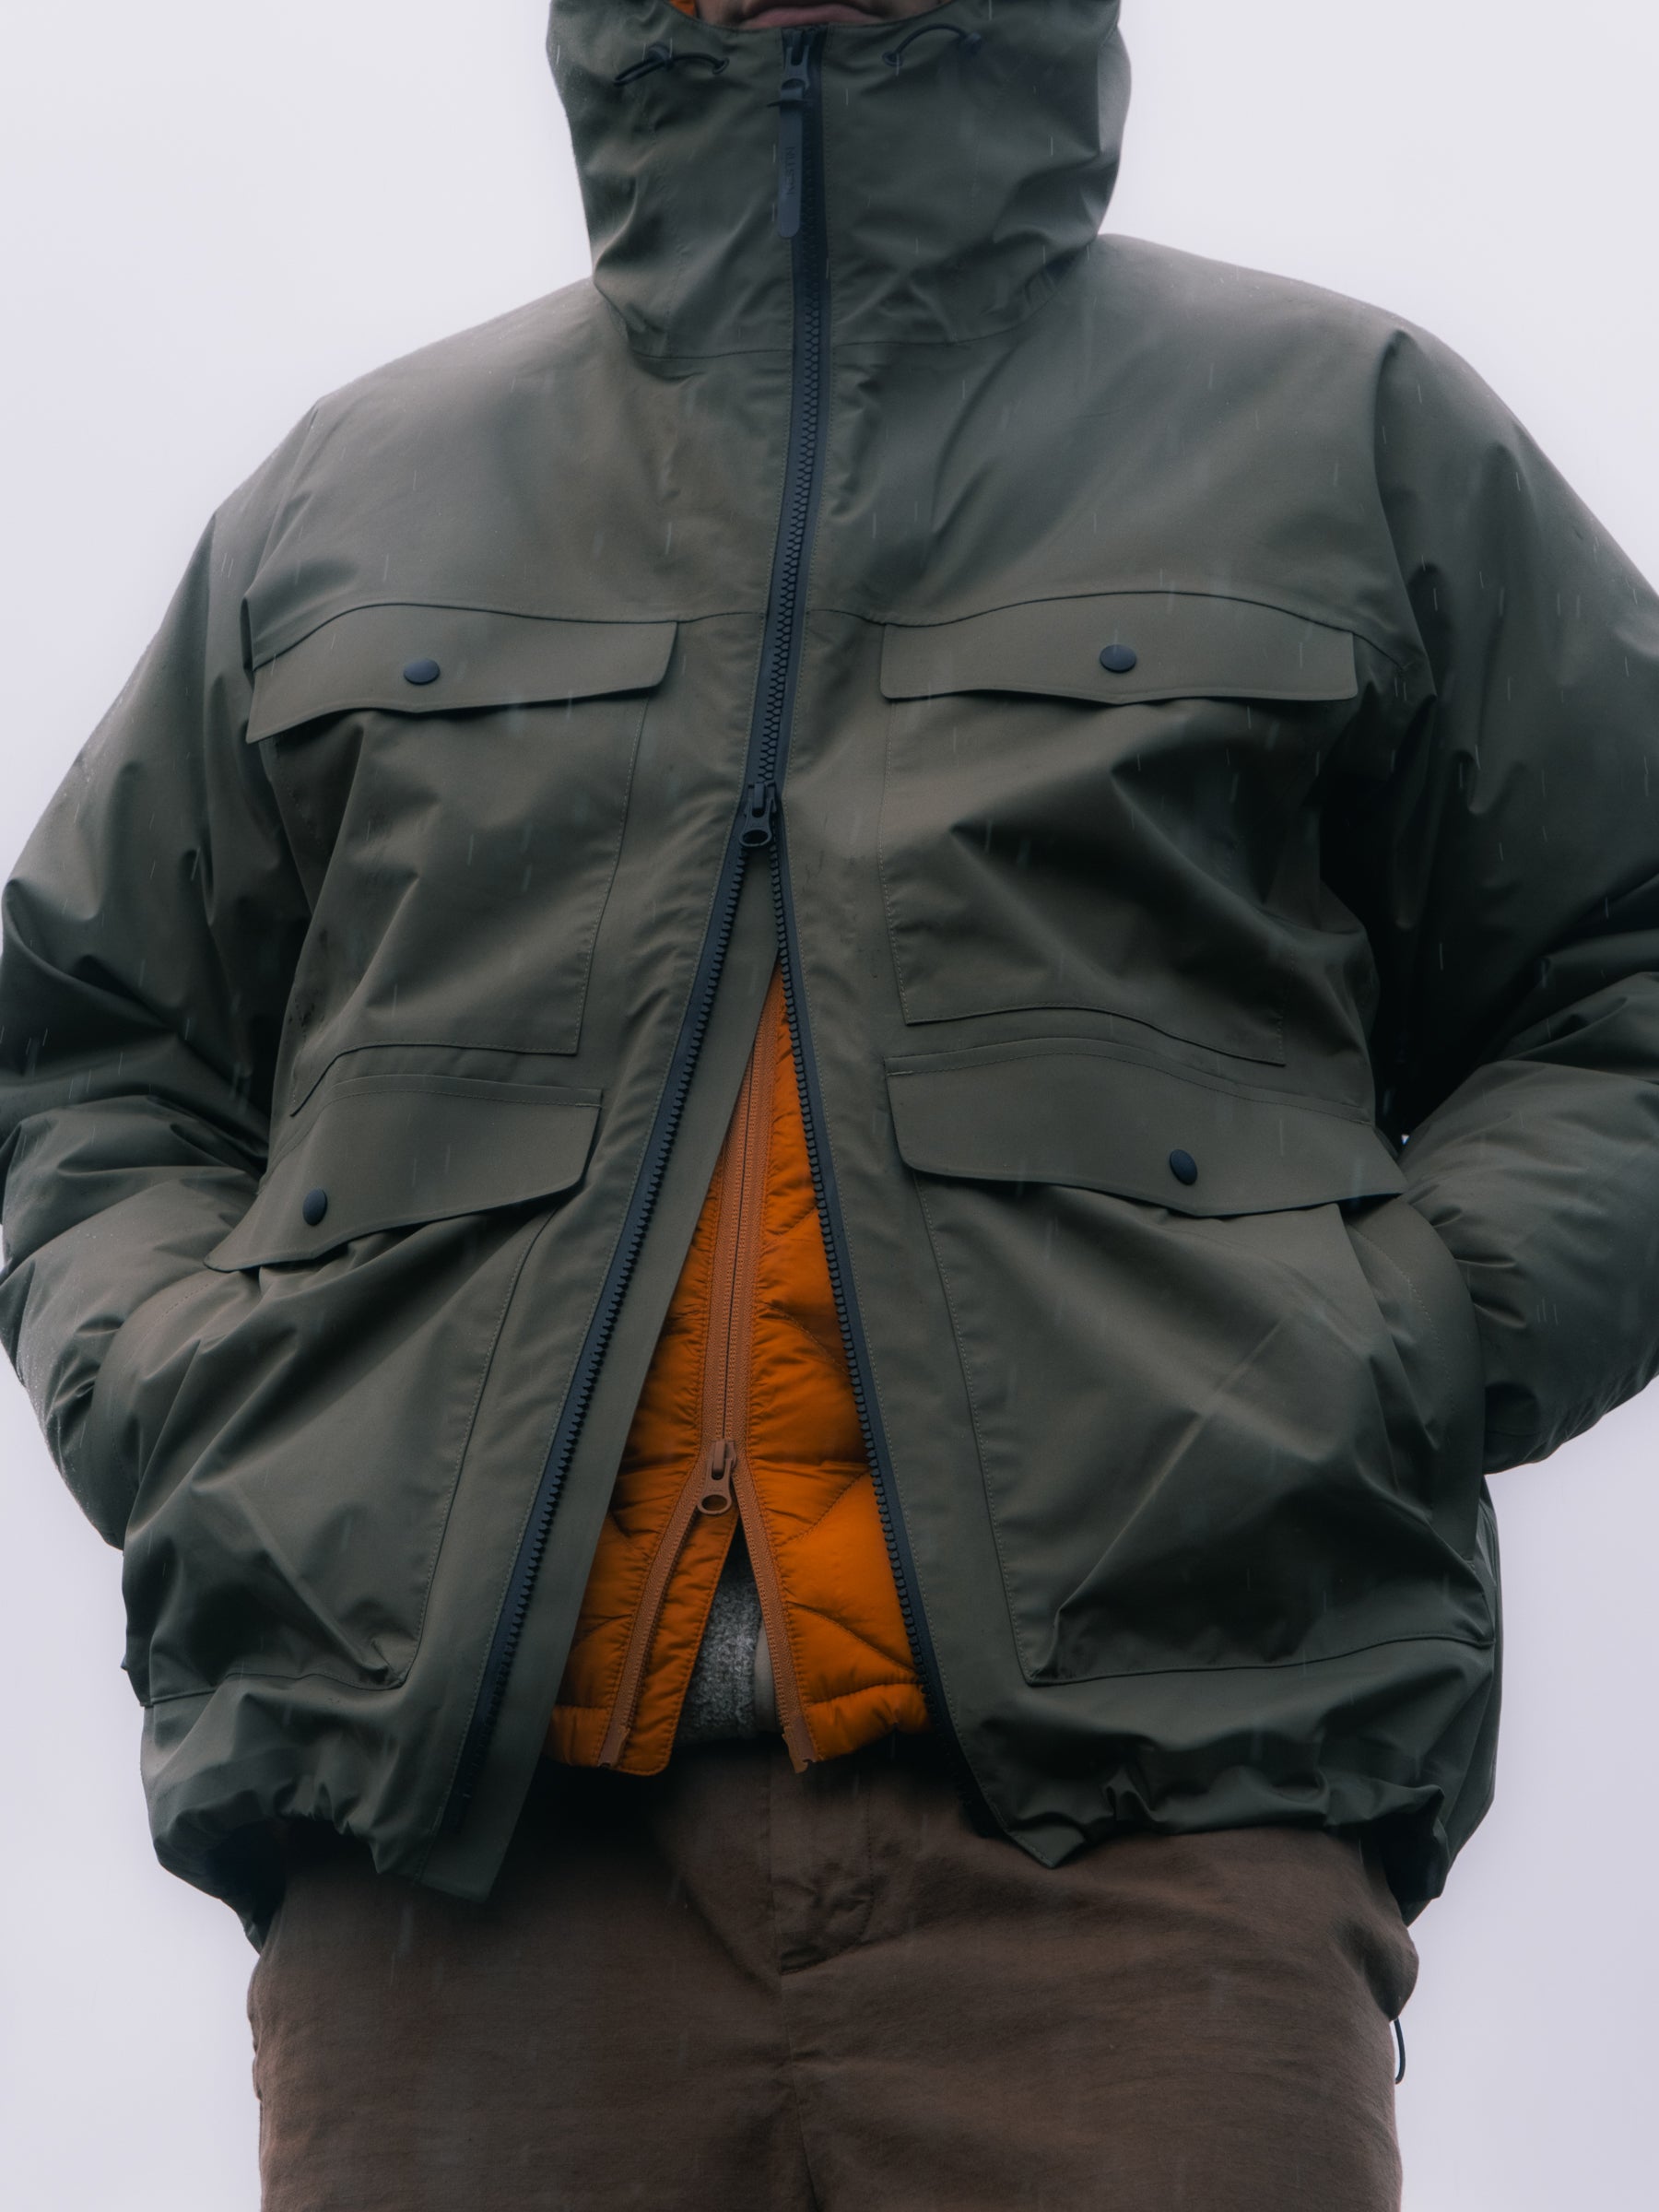 A man wearing a green waterproof jacket in the rain, layered over an orange down jacket.